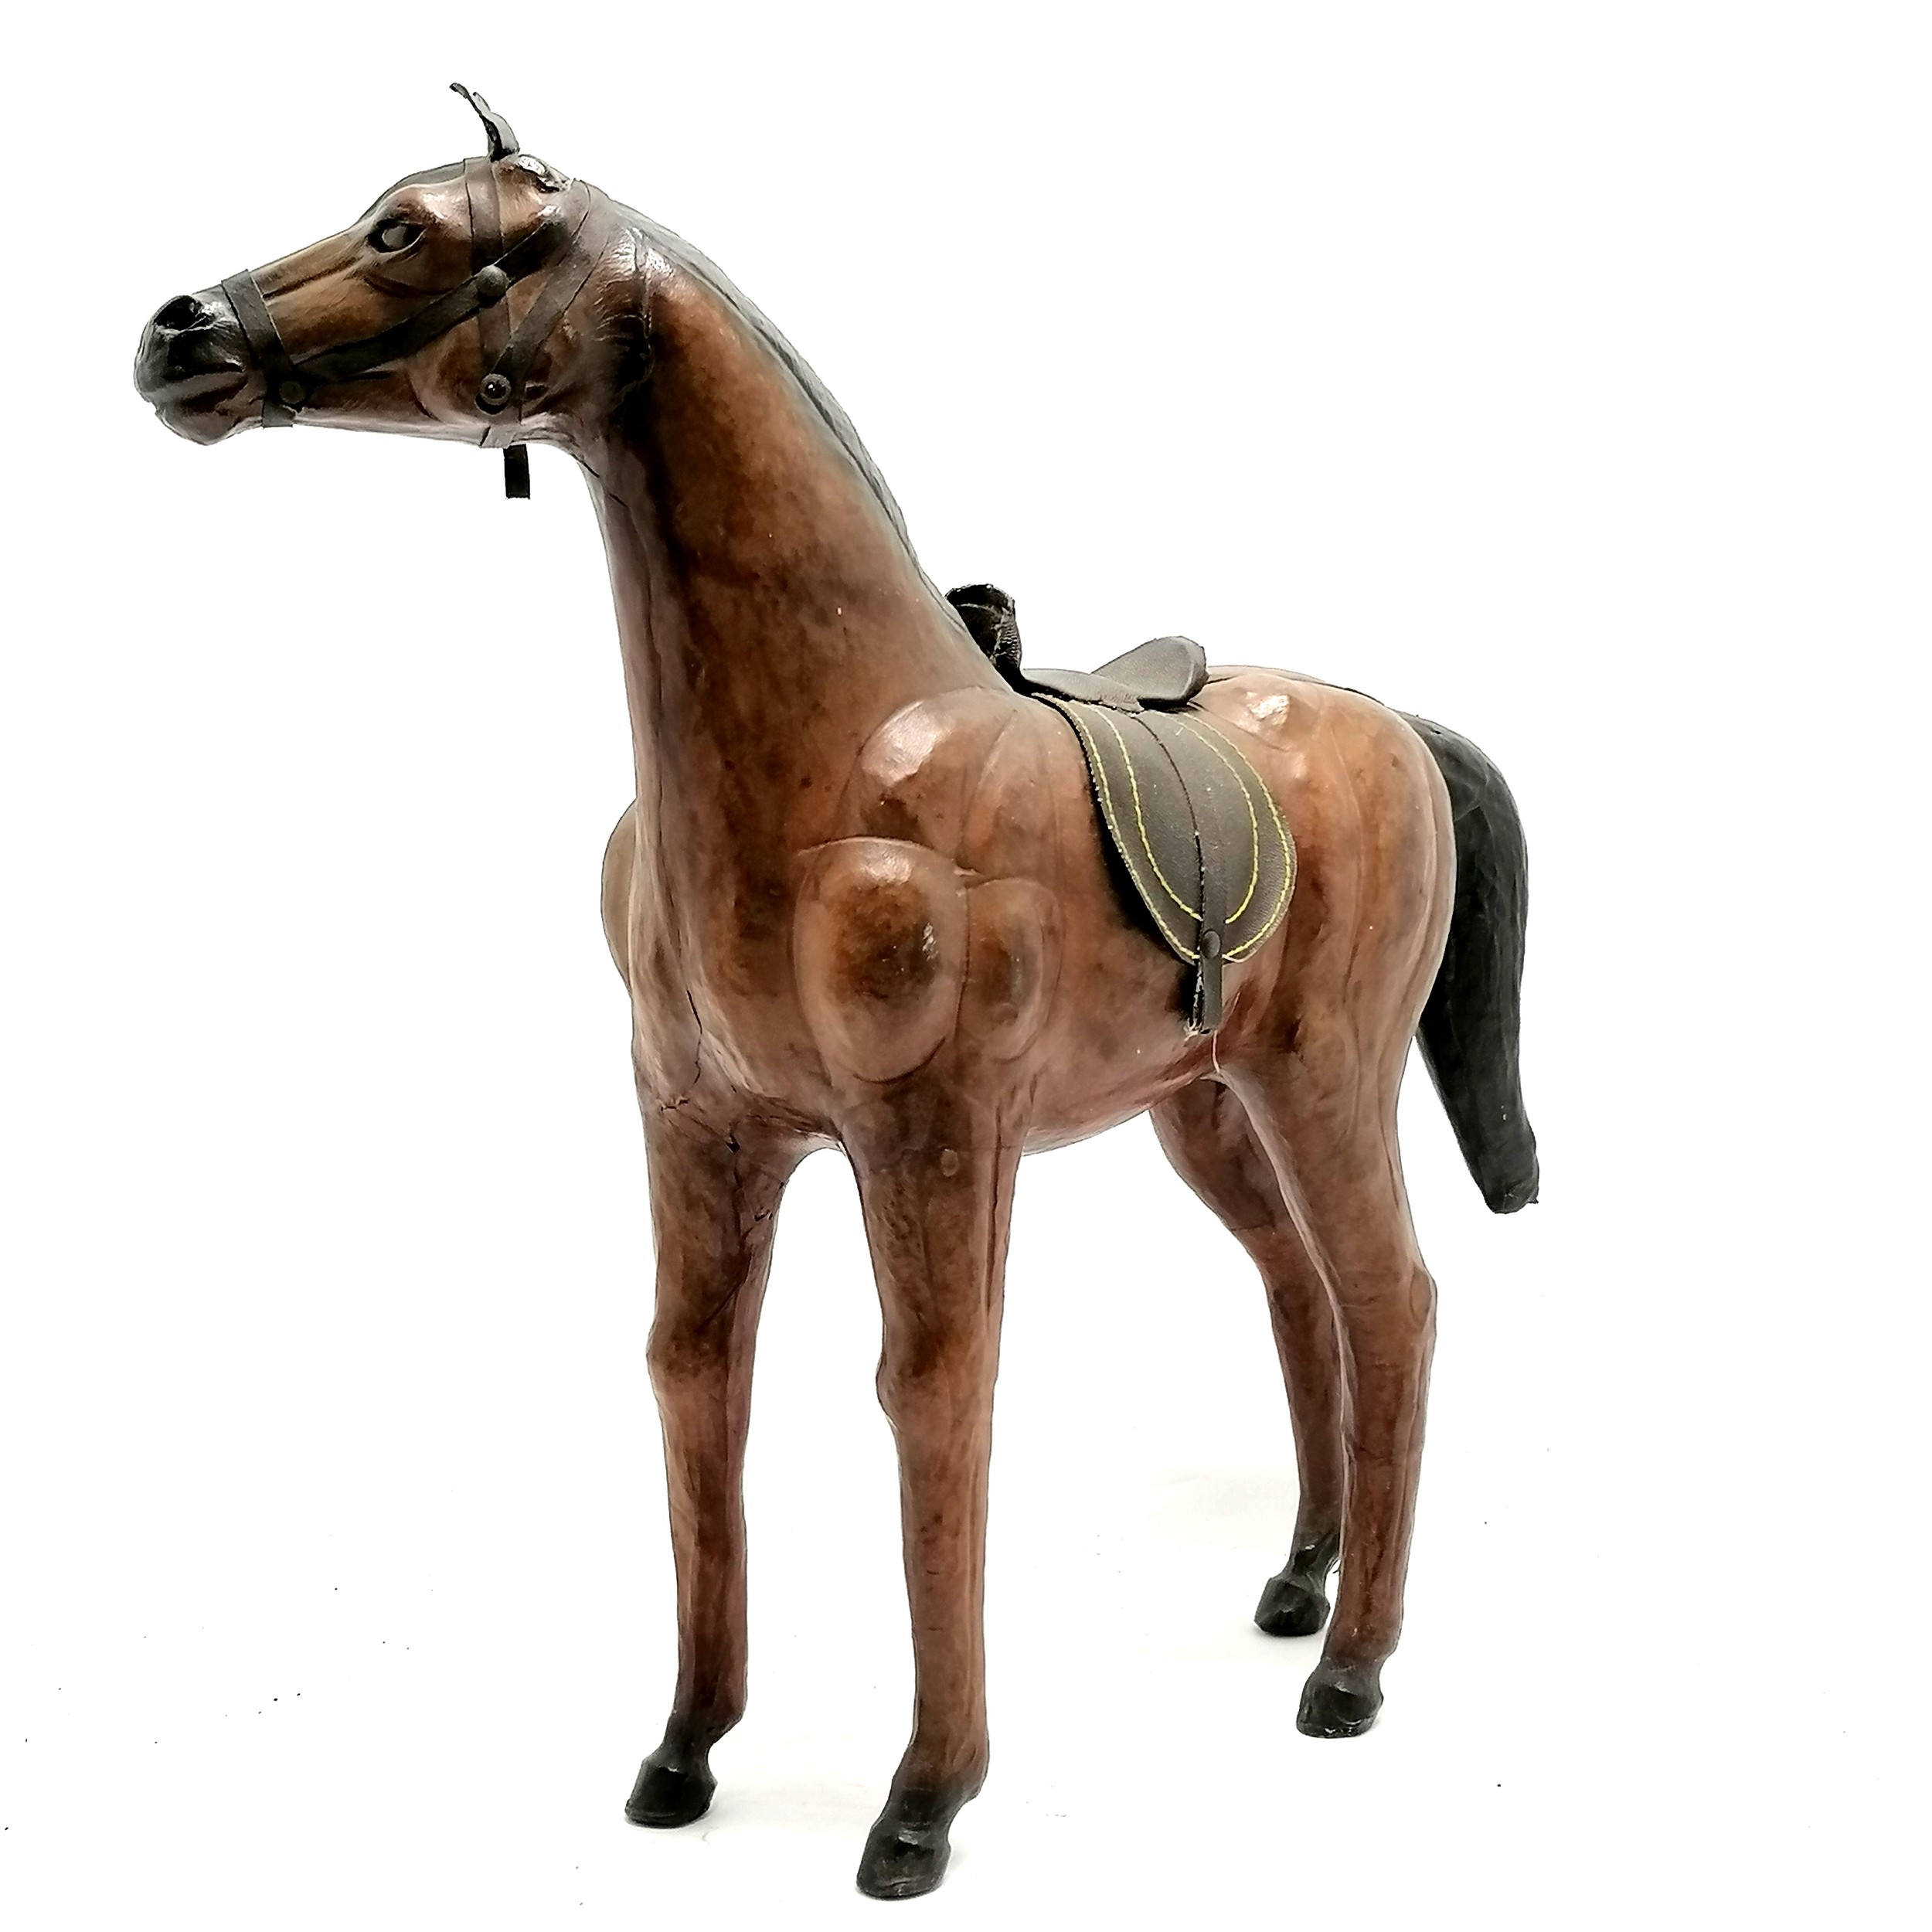 Vintage leather horse with saddle and glass eyes. 49cm high x 48 long in overall good used